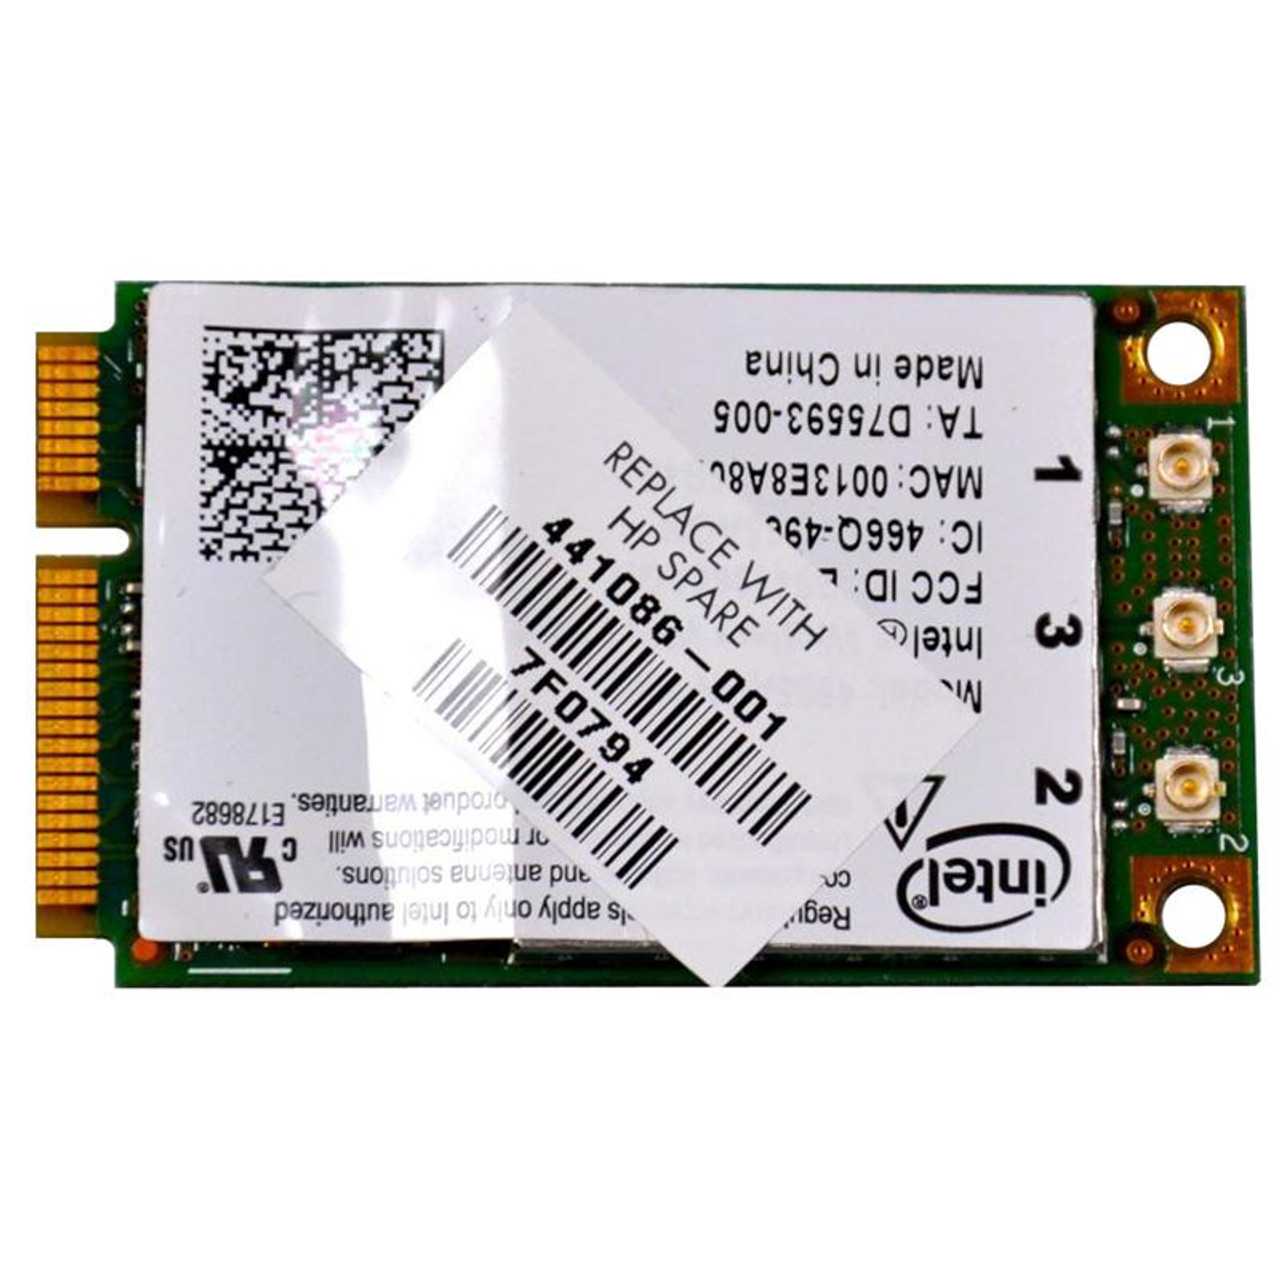 441086-001 HP Dual Band 2.4GHz / 5GHz 300Mbps IEEE 802.11a/b/g/draft-n Mini PCI Express Wireless Network Adapter